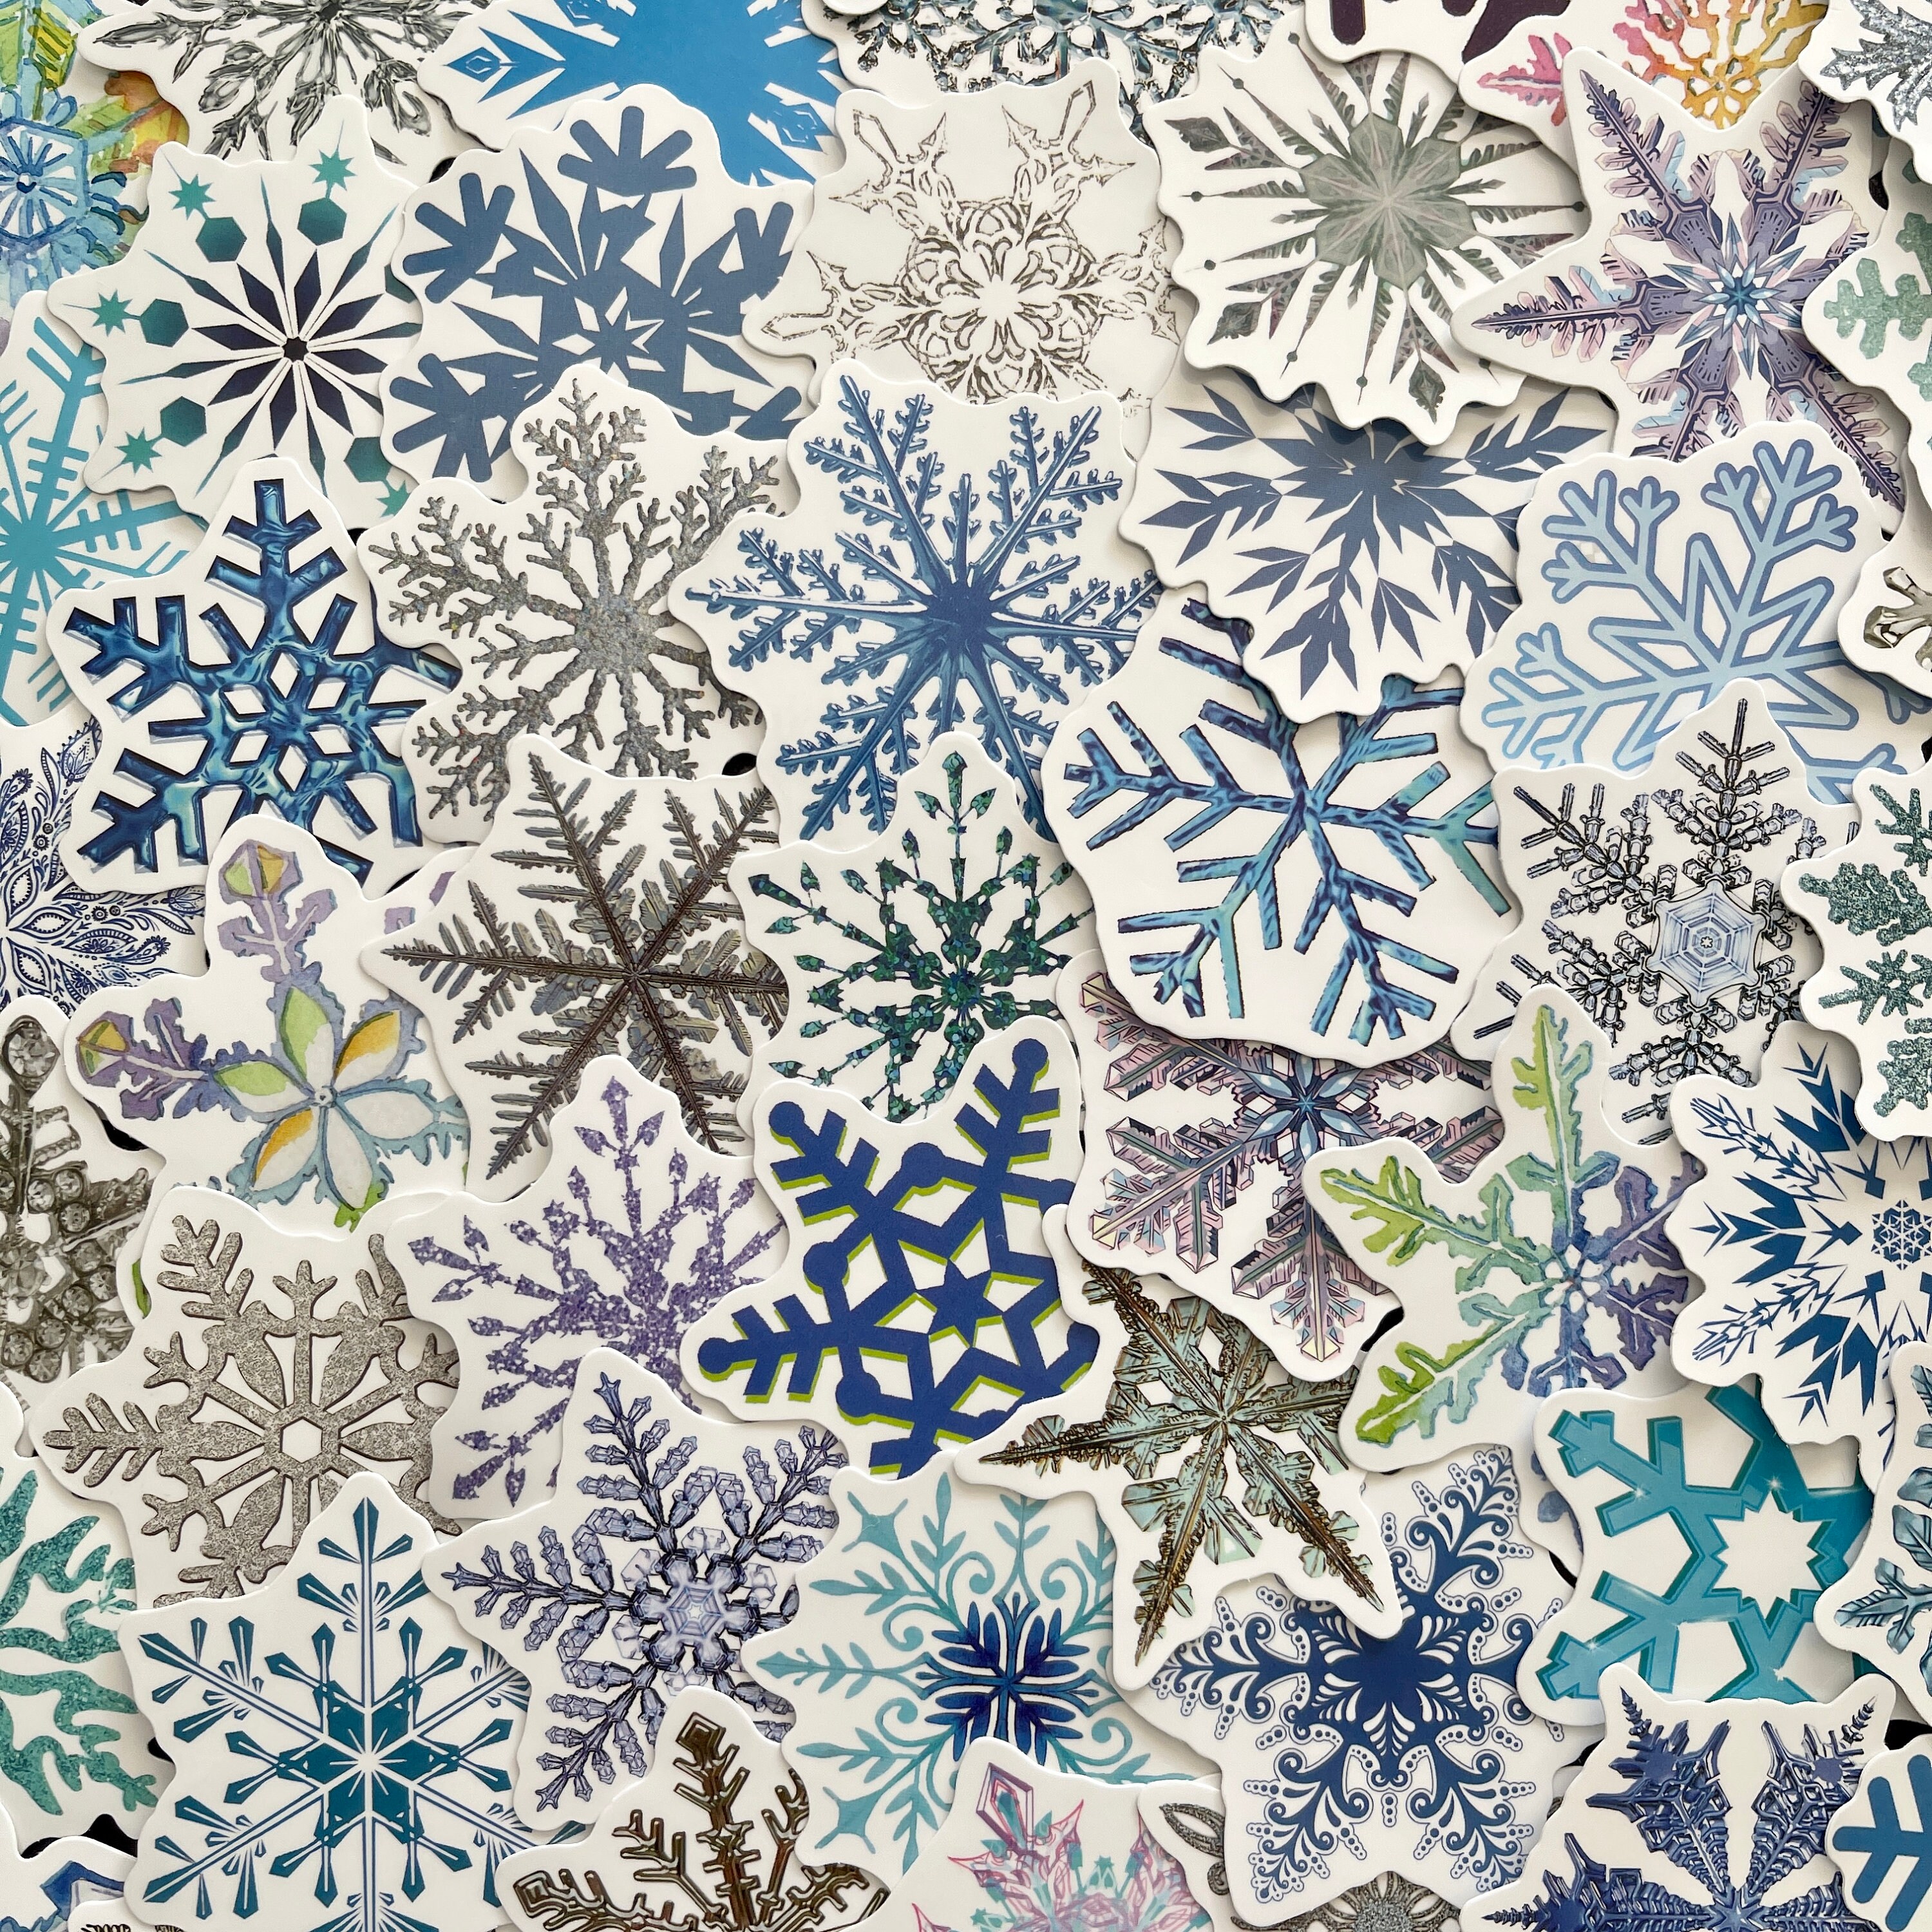 Print and Cut Snowflake Stickers